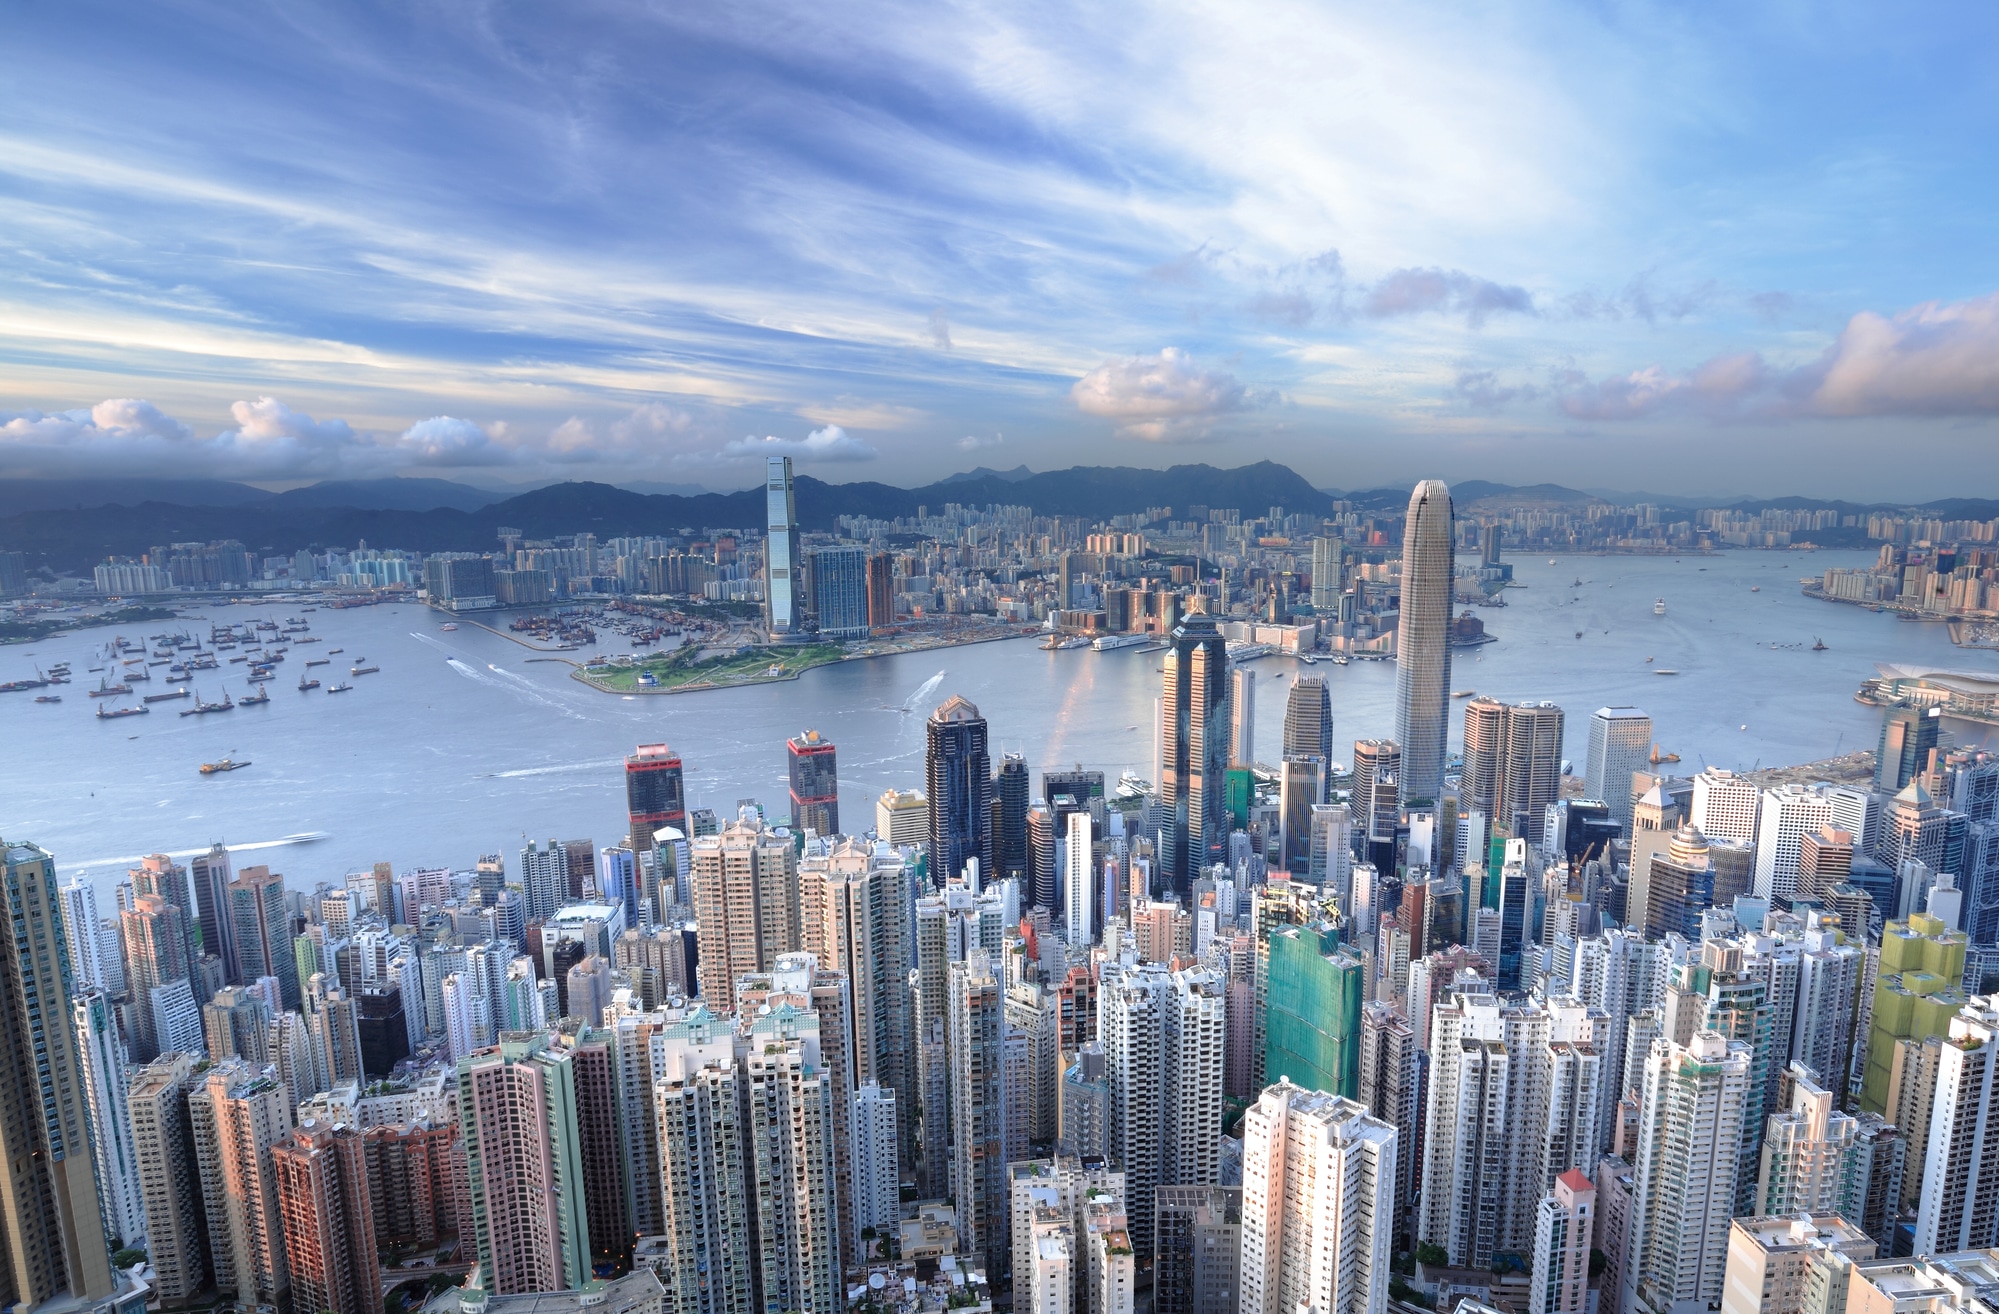 Hong Kong's startup ecosystem attracts talent from all over the world